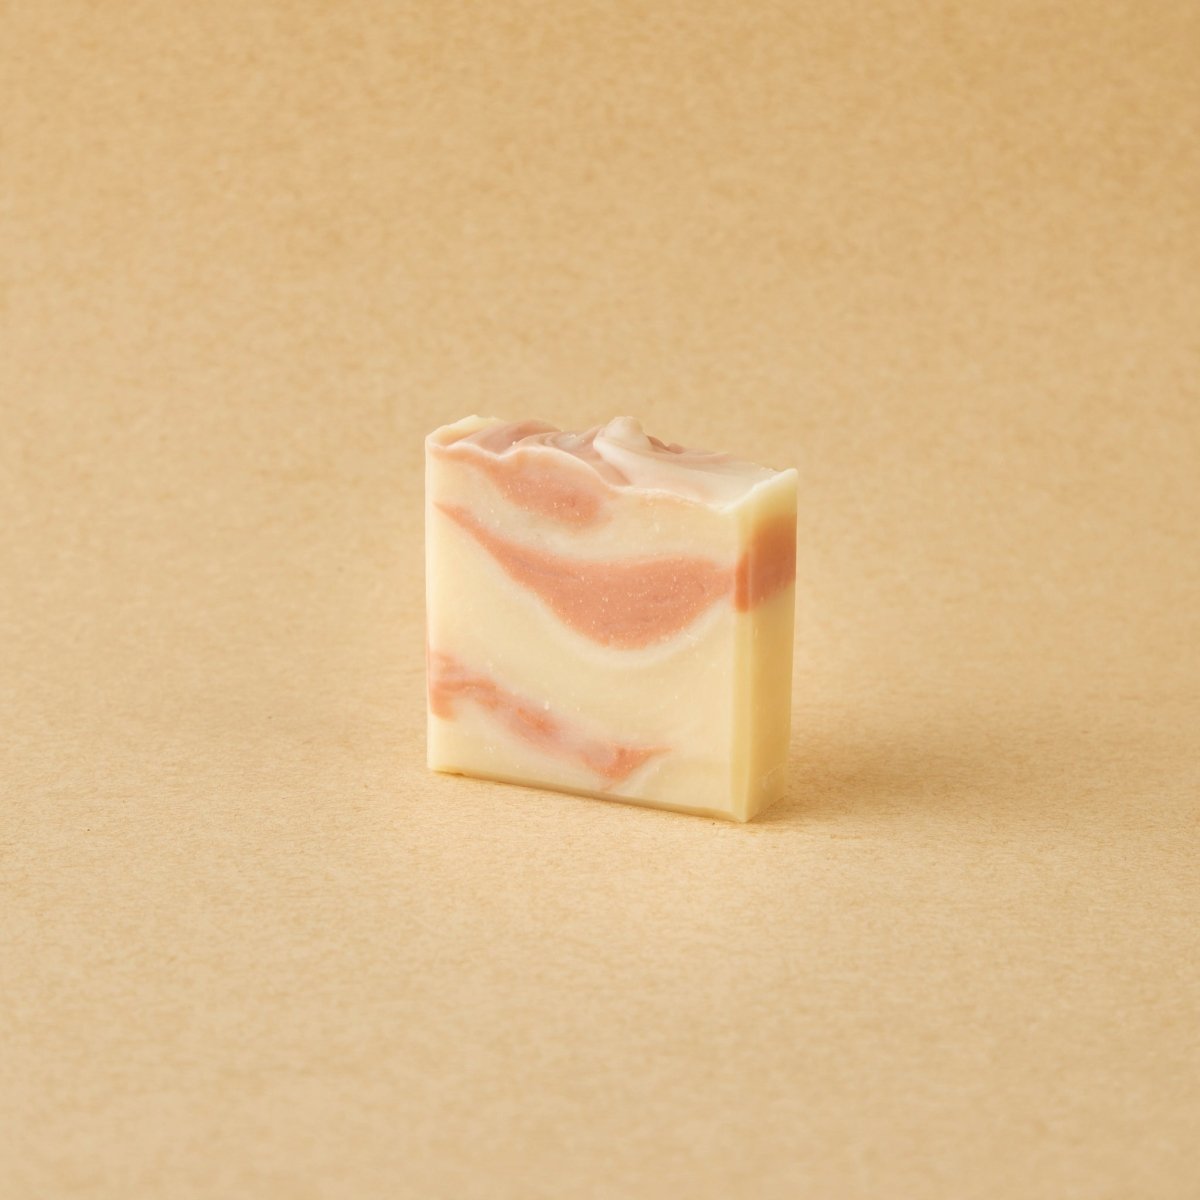 Rosy Lavender Tea Face & Body Soap by Soap Yummy - BetterThanFlowers